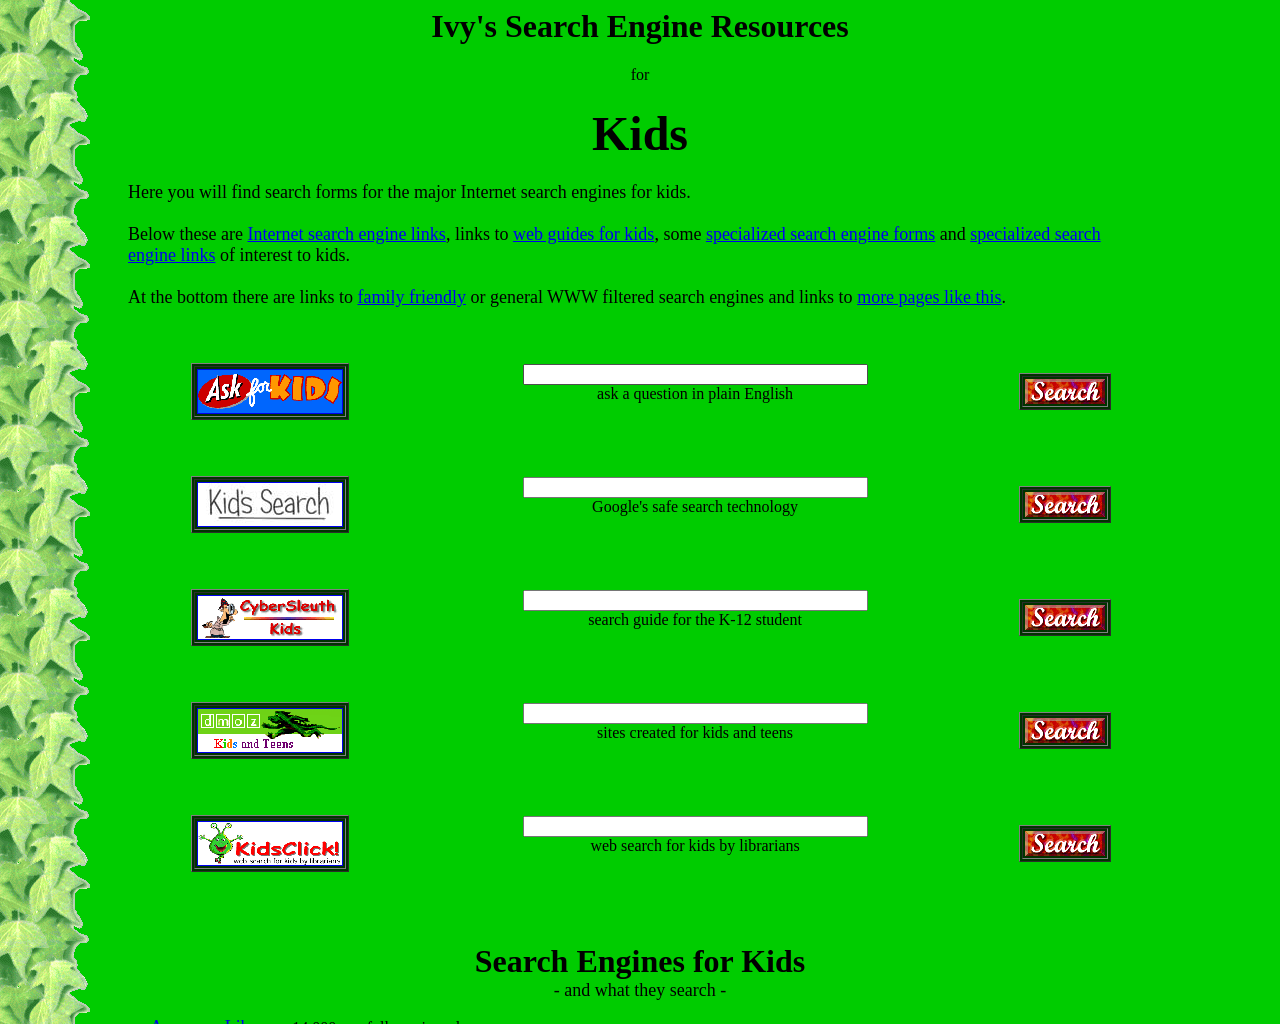 Ivy's Search Engine Resources